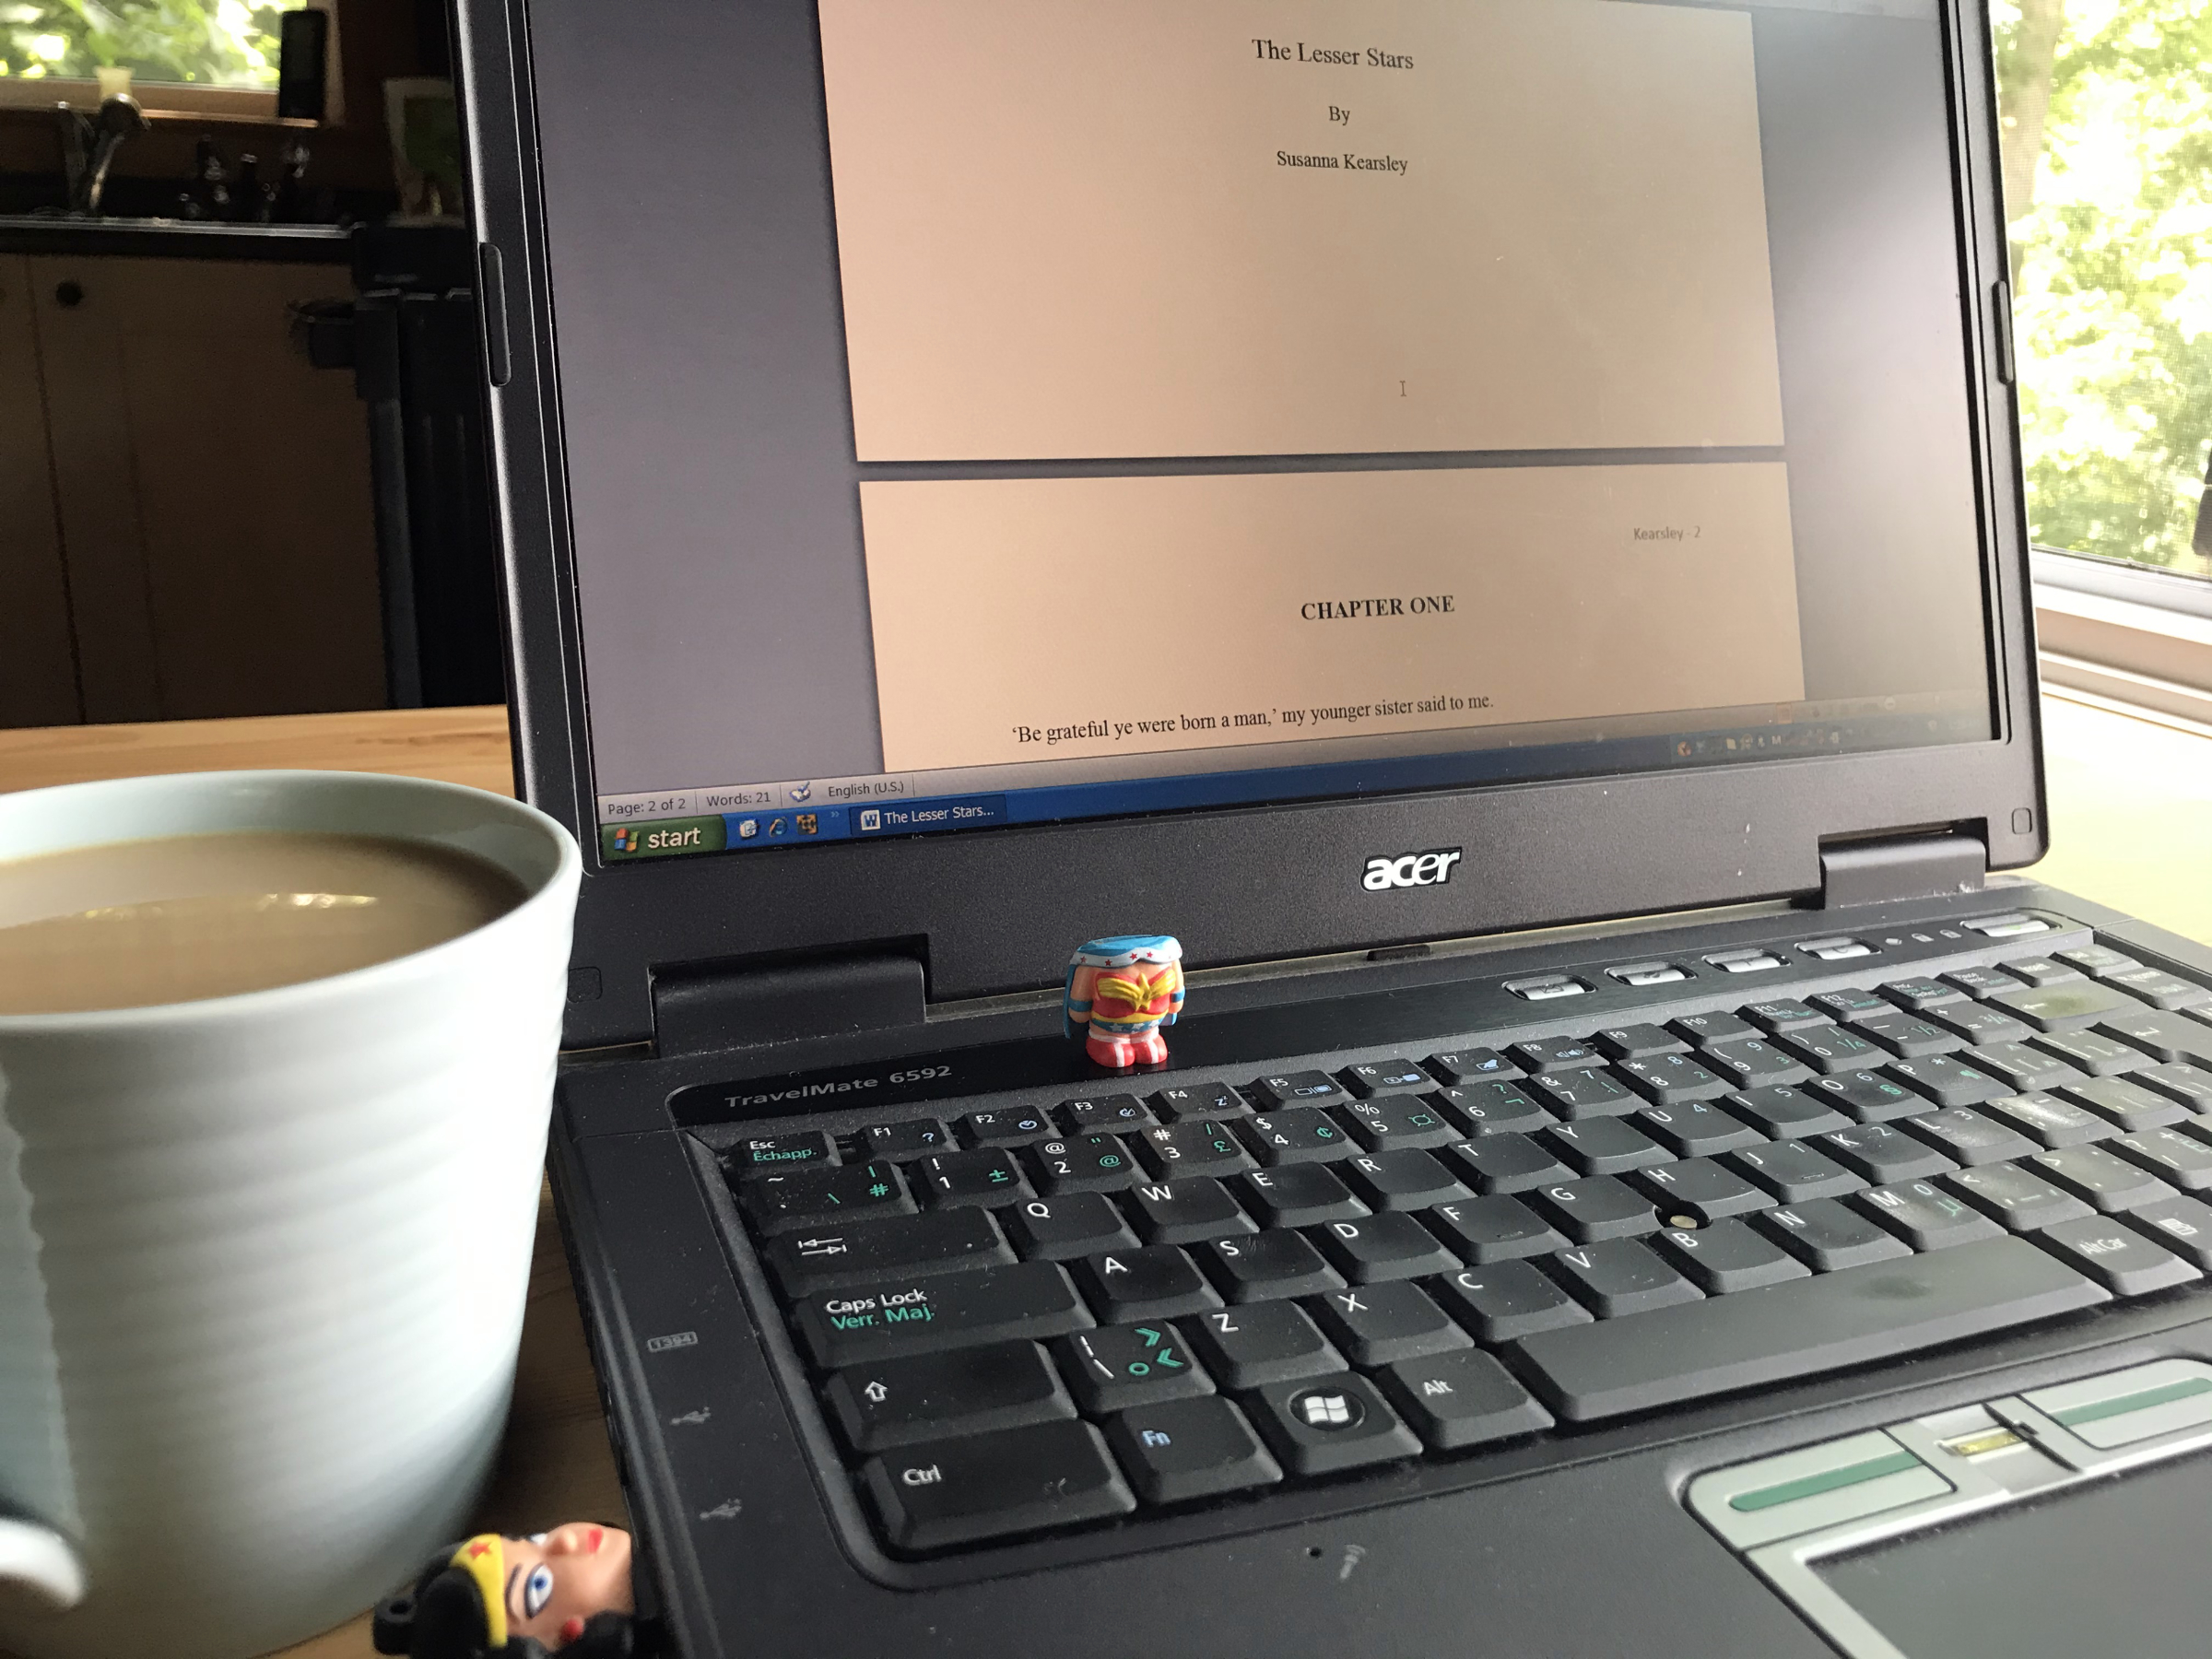 Susanna's laptop is open on a table with a cup of coffee beside it. On the screen is an open Word document with the title of the book she is beginning to write, The Lesser Stars, and the first line, "Be grateful ye were born a man, my younger sister said to me."